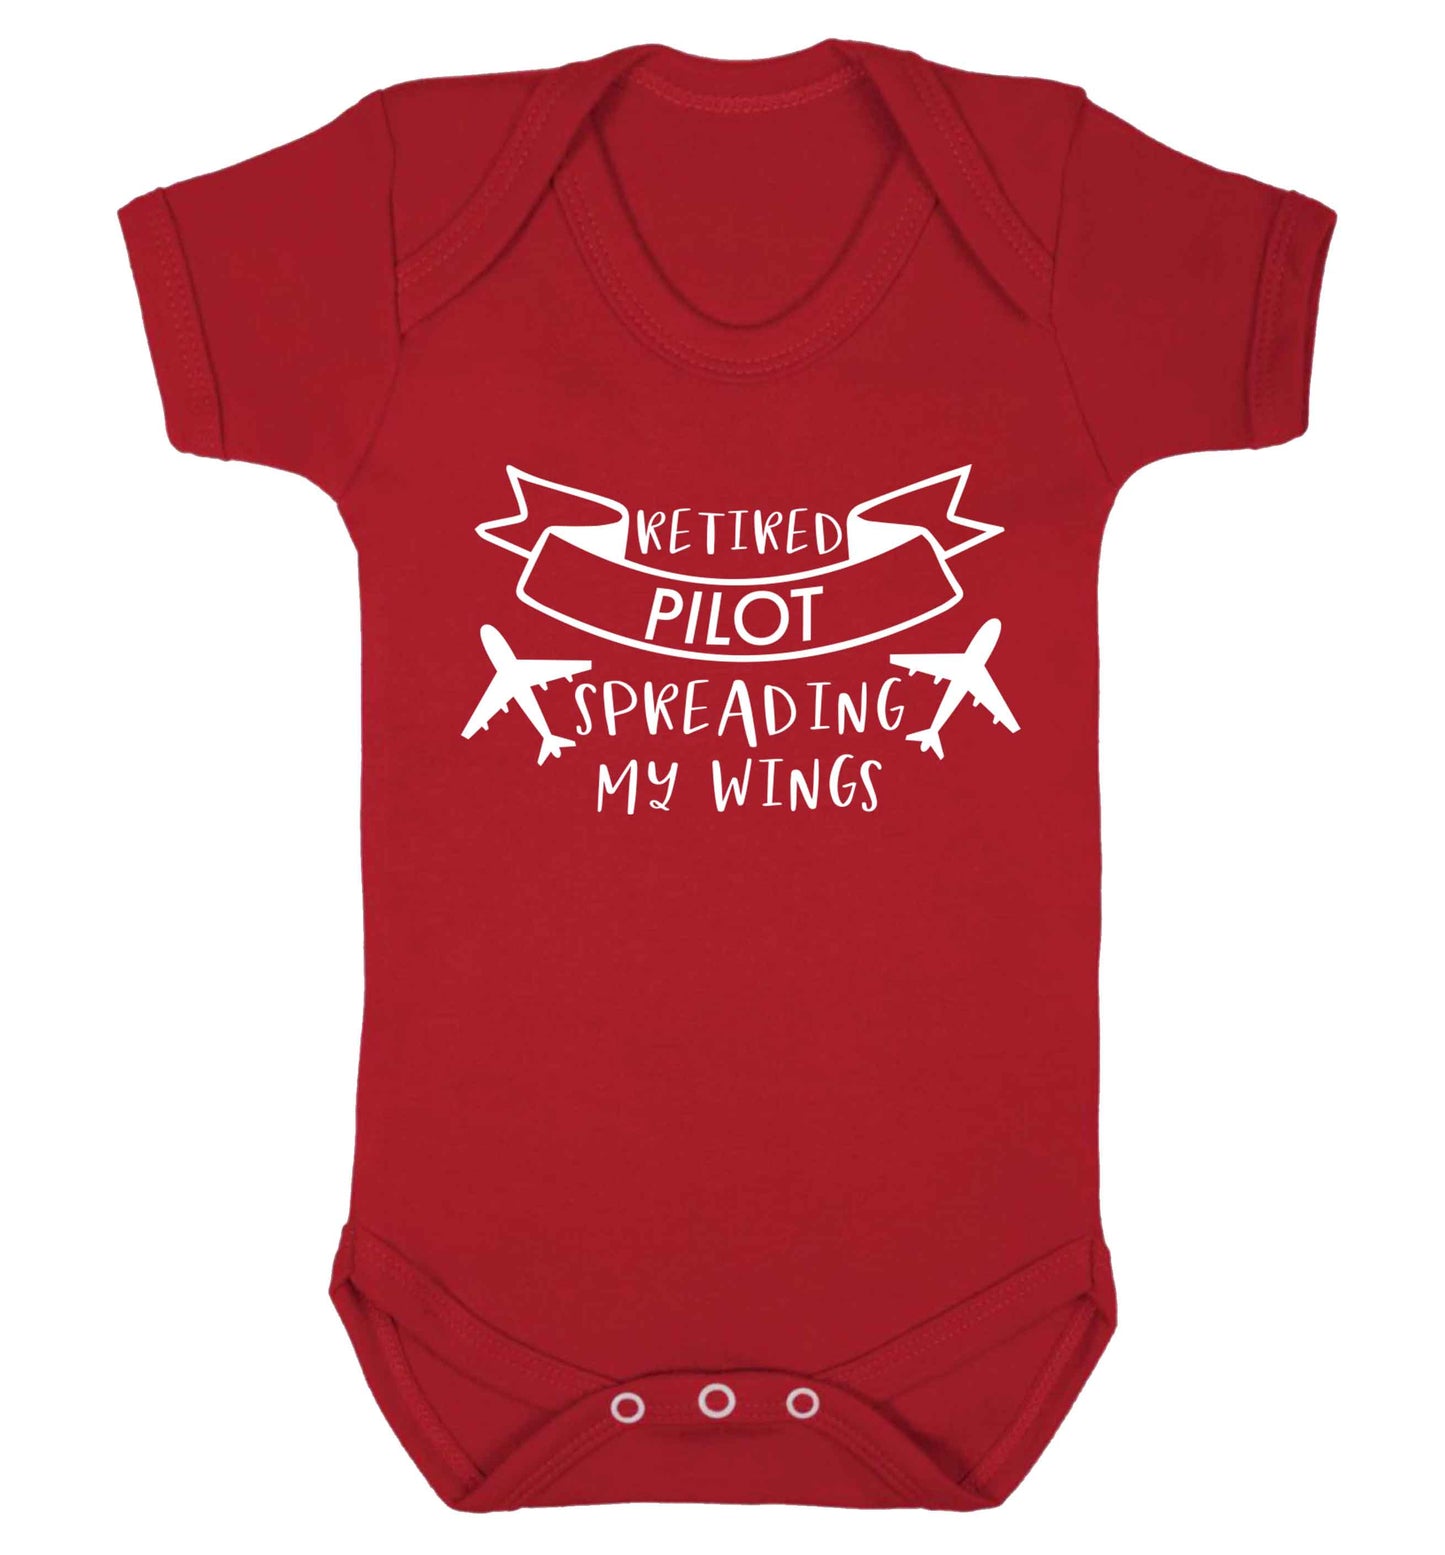 Retired pilot spreading my wings Baby Vest red 18-24 months